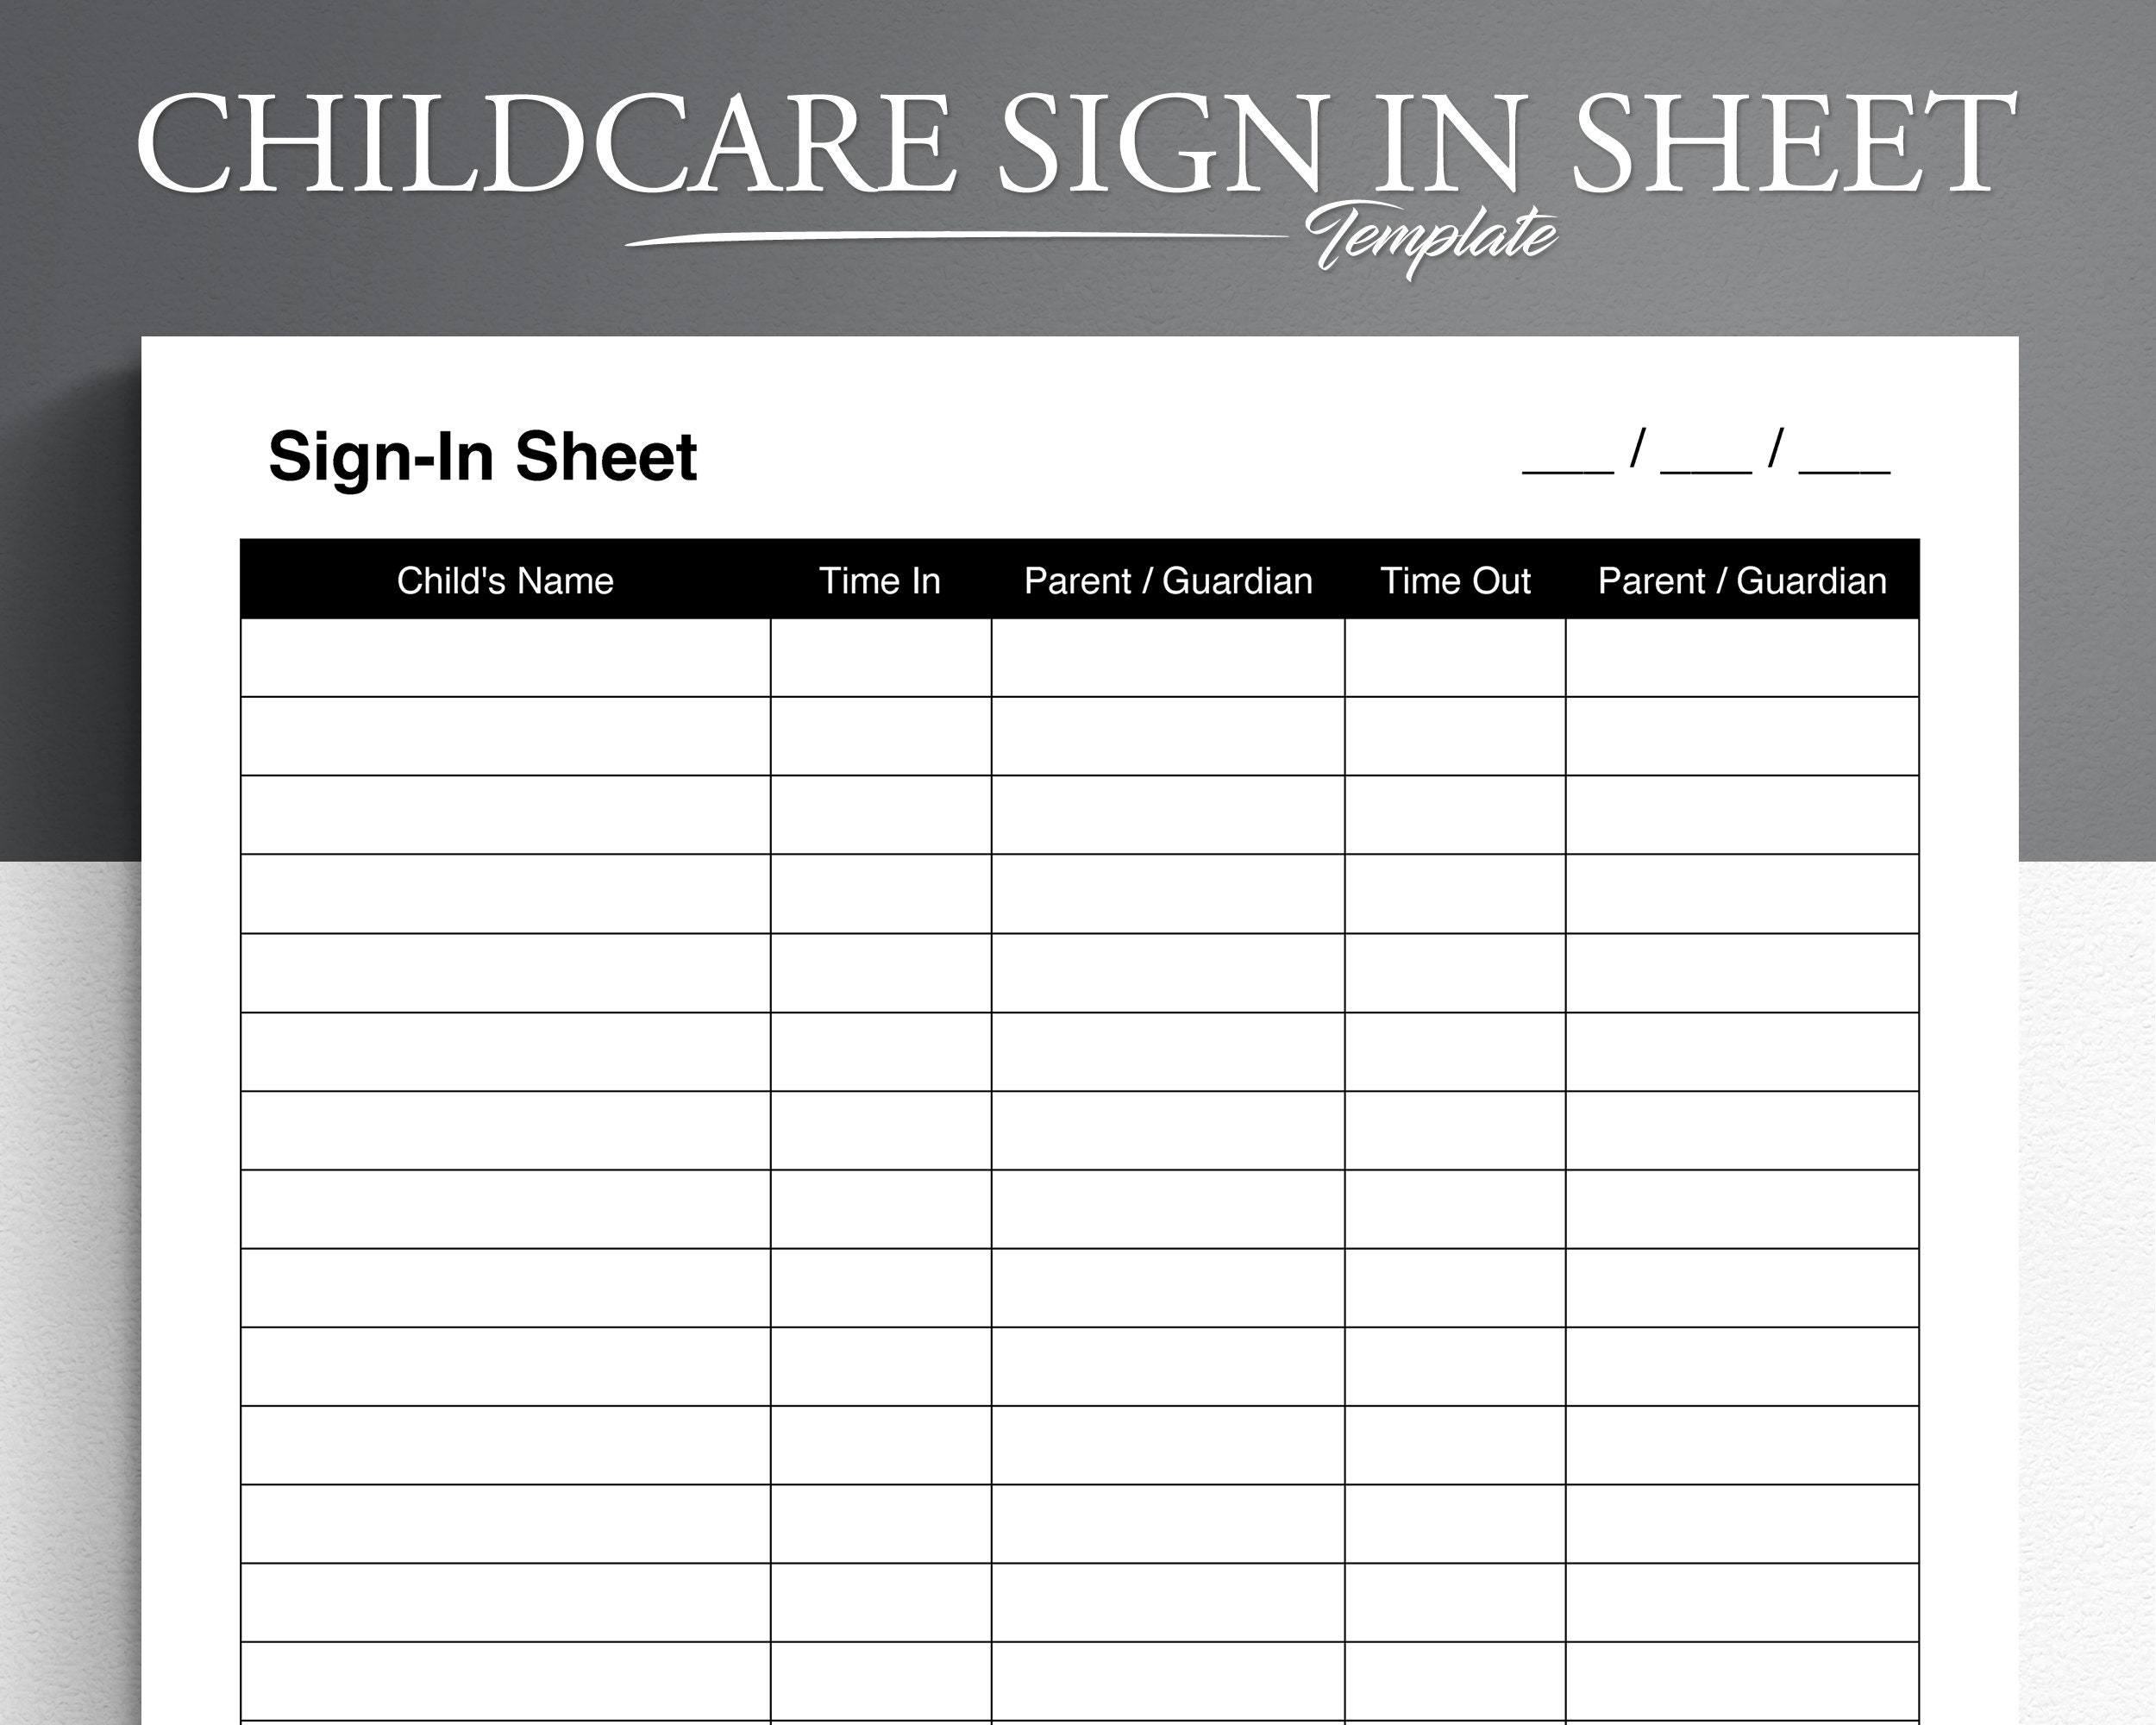 editable-childcare-sign-in-sheet-daycare-sign-in-nursery-etsy-de